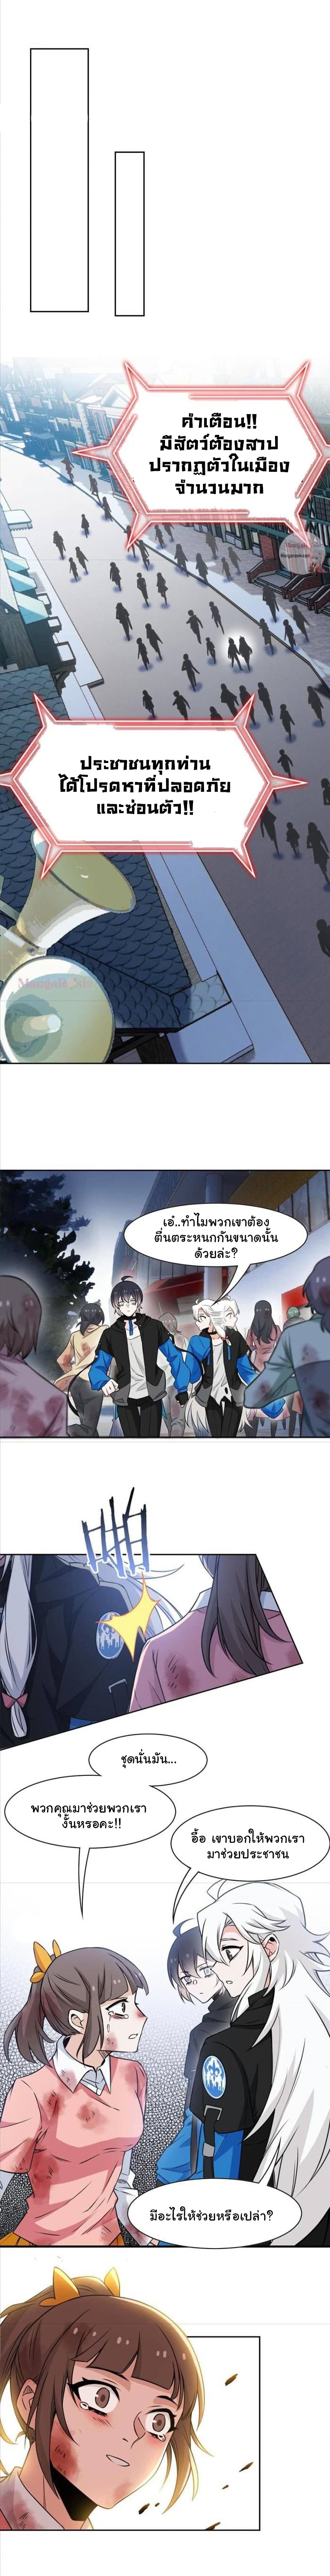 The Strong Man From The Mental Hospital  99 แปลไทย